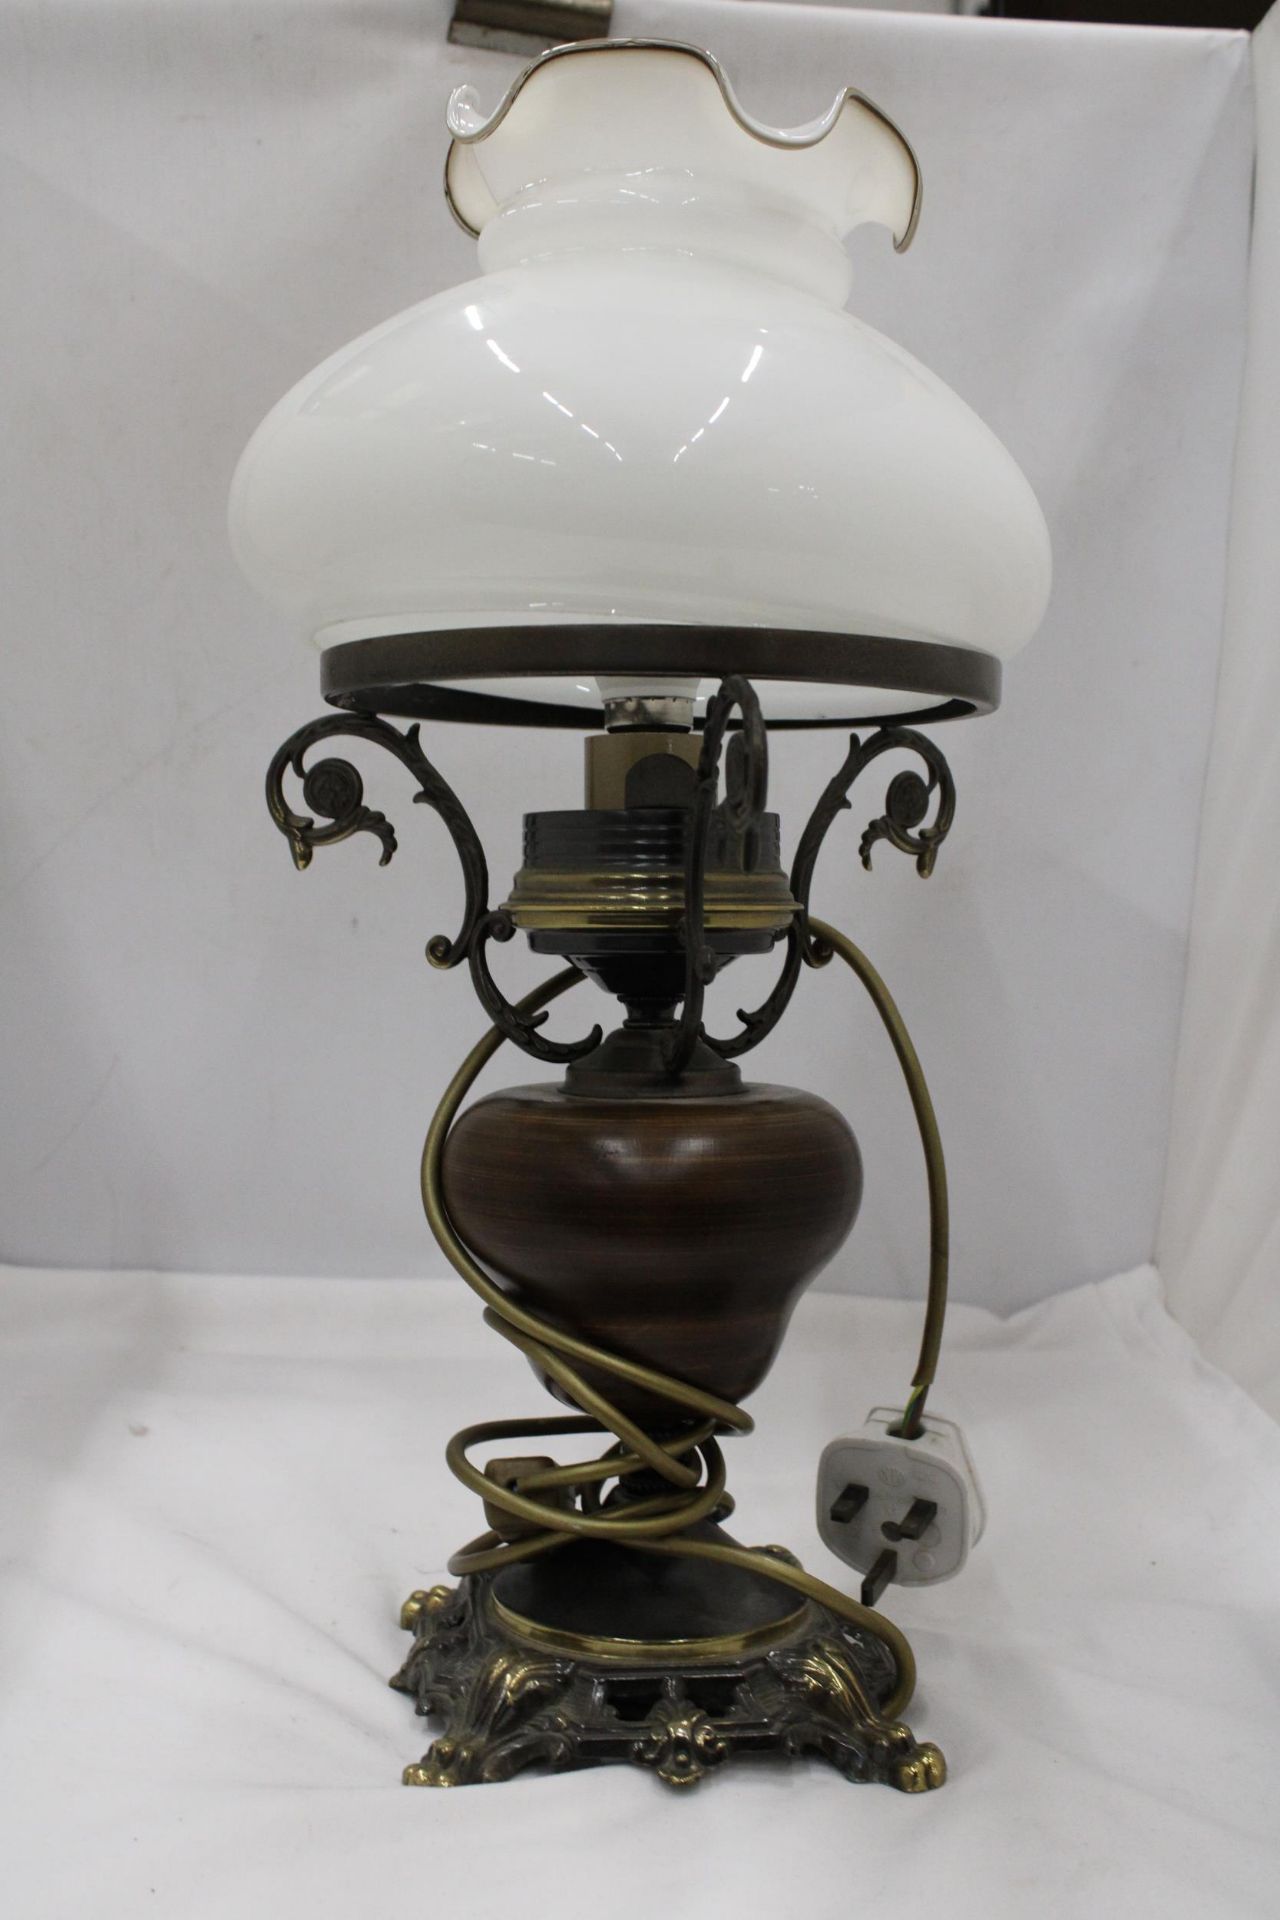 A VINTAGE STYLE TABLE LAMP IN THE STYLE OF AN OIL LAMP, WITH FLUTED GLASS SHADE, WOODEN MIDDLE AND - Image 4 of 4